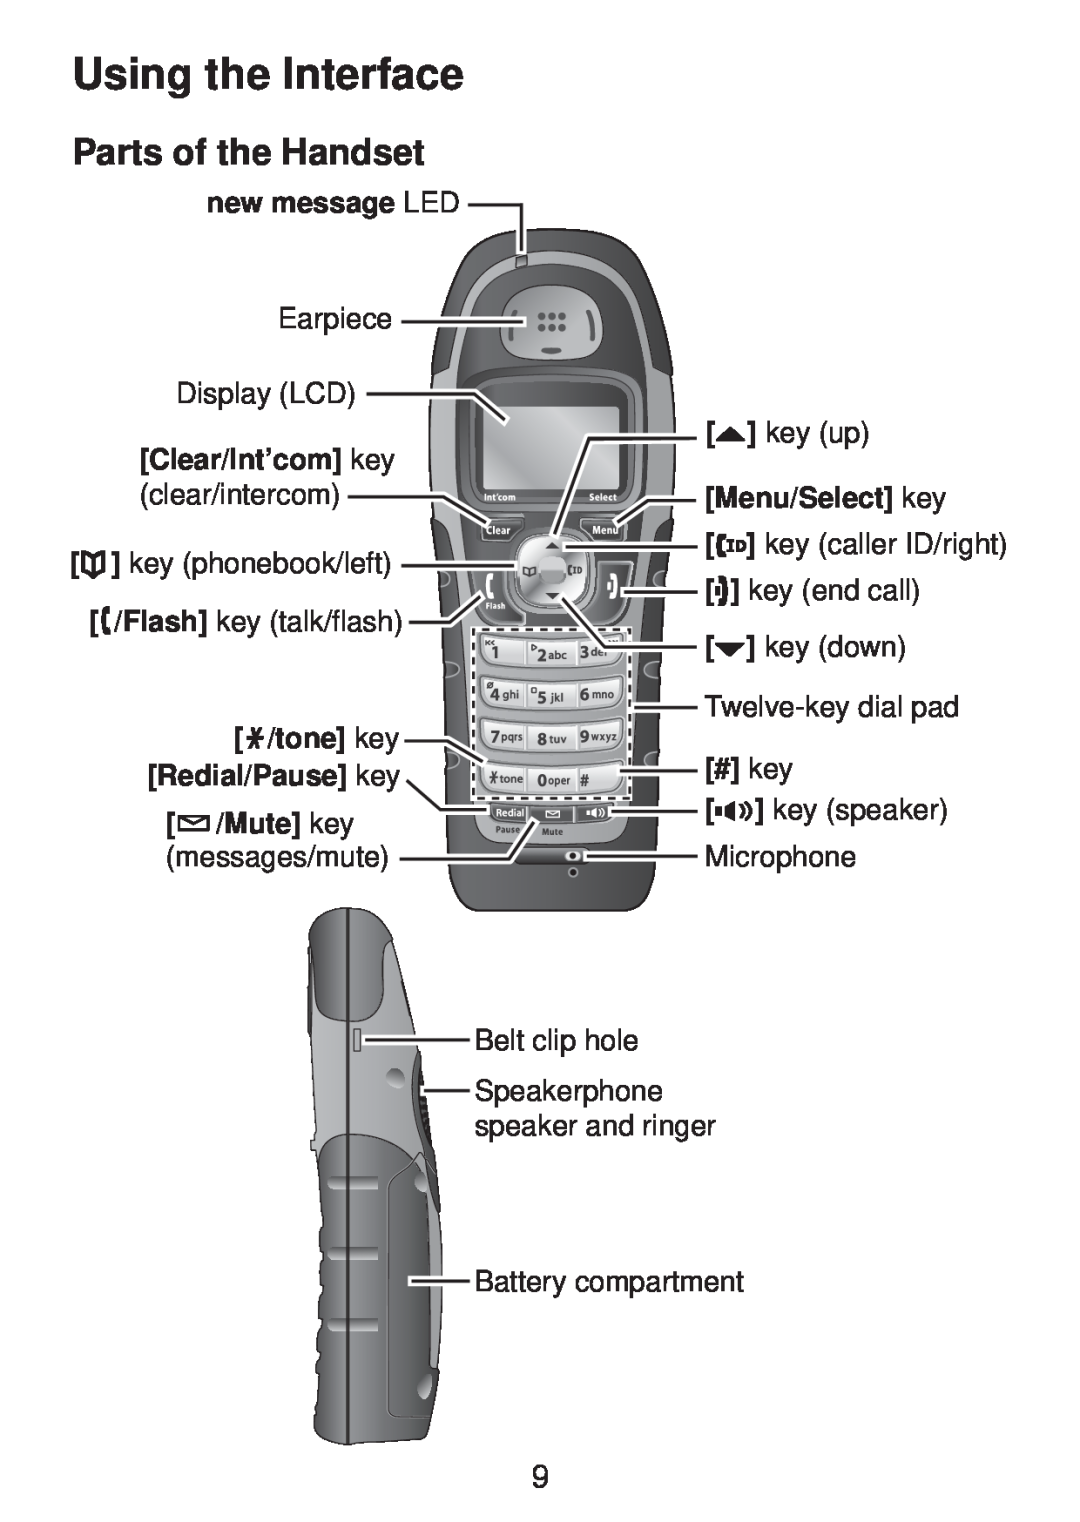 Uniden DWX207 manual Using the Interface, Parts of the Handset 